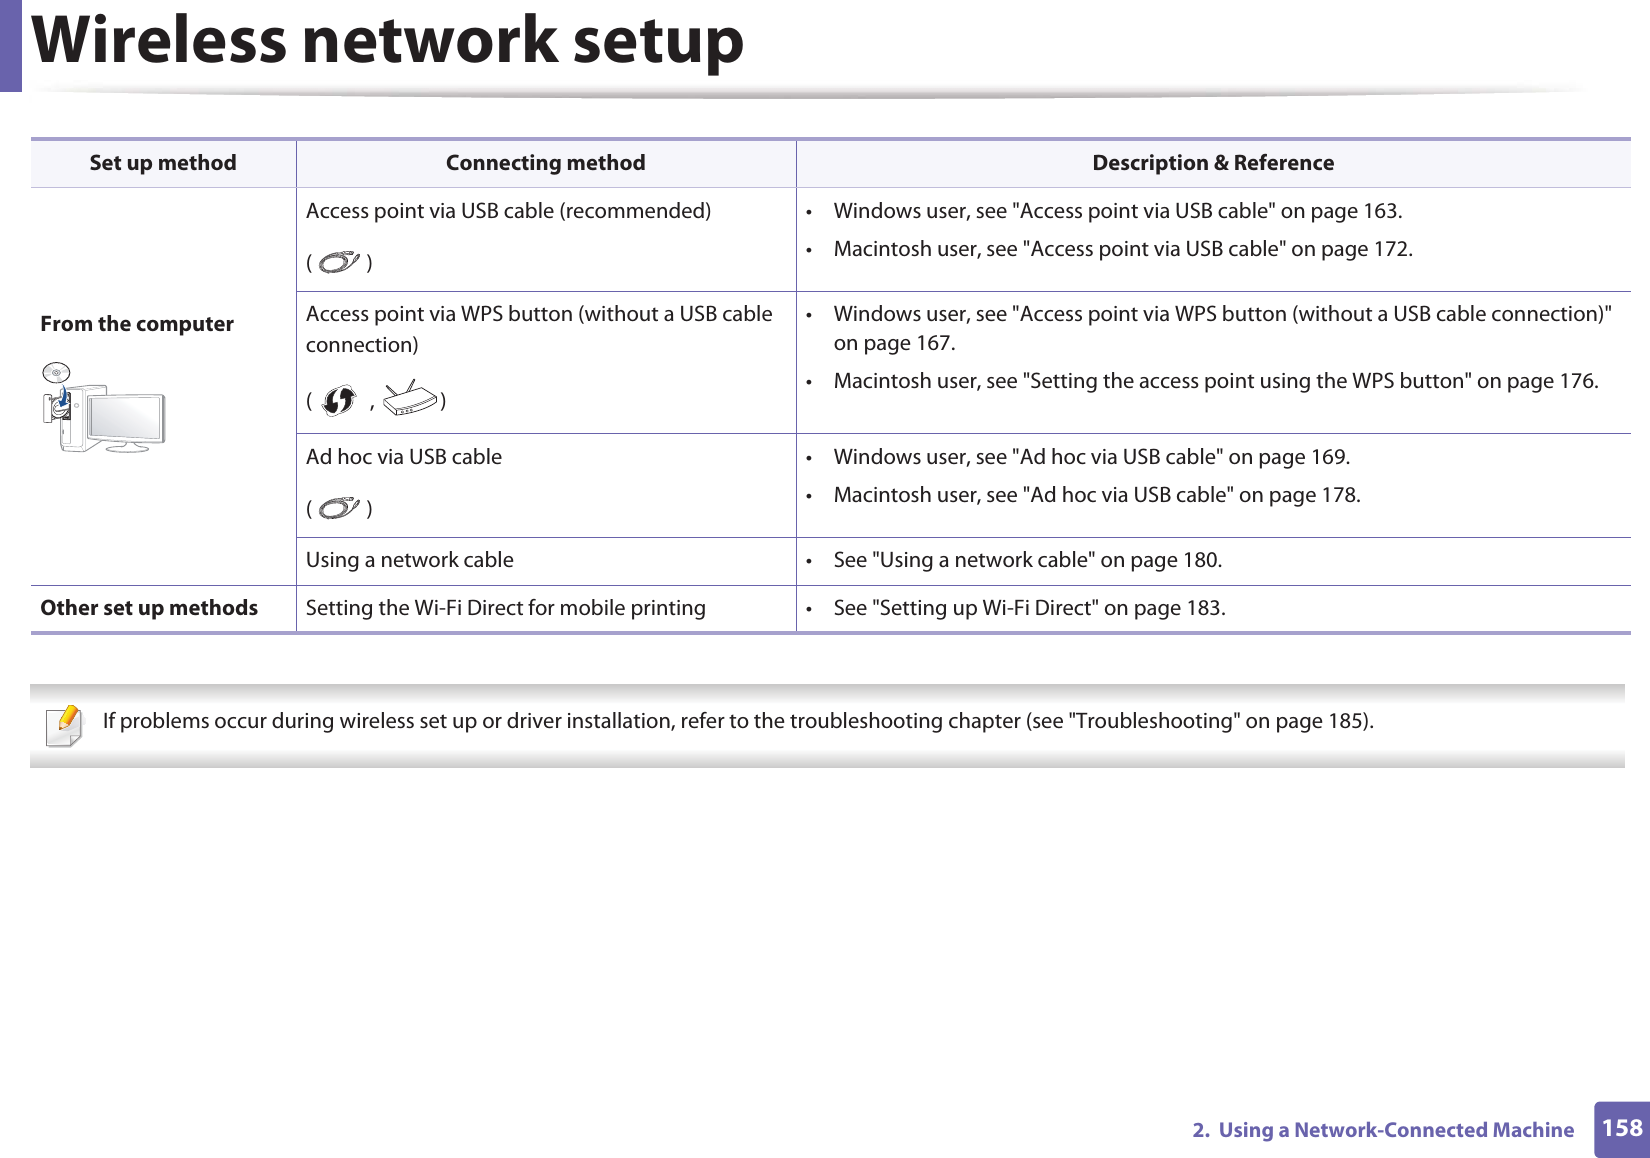 Wireless network setup1582.  Using a Network-Connected Machine  If problems occur during wireless set up or driver installation, refer to the troubleshooting chapter (see &quot;Troubleshooting&quot; on page 185). From the computerAccess point via USB cable (recommended)()• Windows user, see &quot;Access point via USB cable&quot; on page 163.• Macintosh user, see &quot;Access point via USB cable&quot; on page 172.Access point via WPS button (without a USB cable connection)( ,  )• Windows user, see &quot;Access point via WPS button (without a USB cable connection)&quot; on page 167.• Macintosh user, see &quot;Setting the access point using the WPS button&quot; on page 176.Ad hoc via USB cable()• Windows user, see &quot;Ad hoc via USB cable&quot; on page 169.• Macintosh user, see &quot;Ad hoc via USB cable&quot; on page 178.Using a network cable • See &quot;Using a network cable&quot; on page 180.Other set up methods Setting the Wi-Fi Direct for mobile printing • See &quot;Setting up Wi-Fi Direct&quot; on page 183.Set up method Connecting method Description &amp; Reference